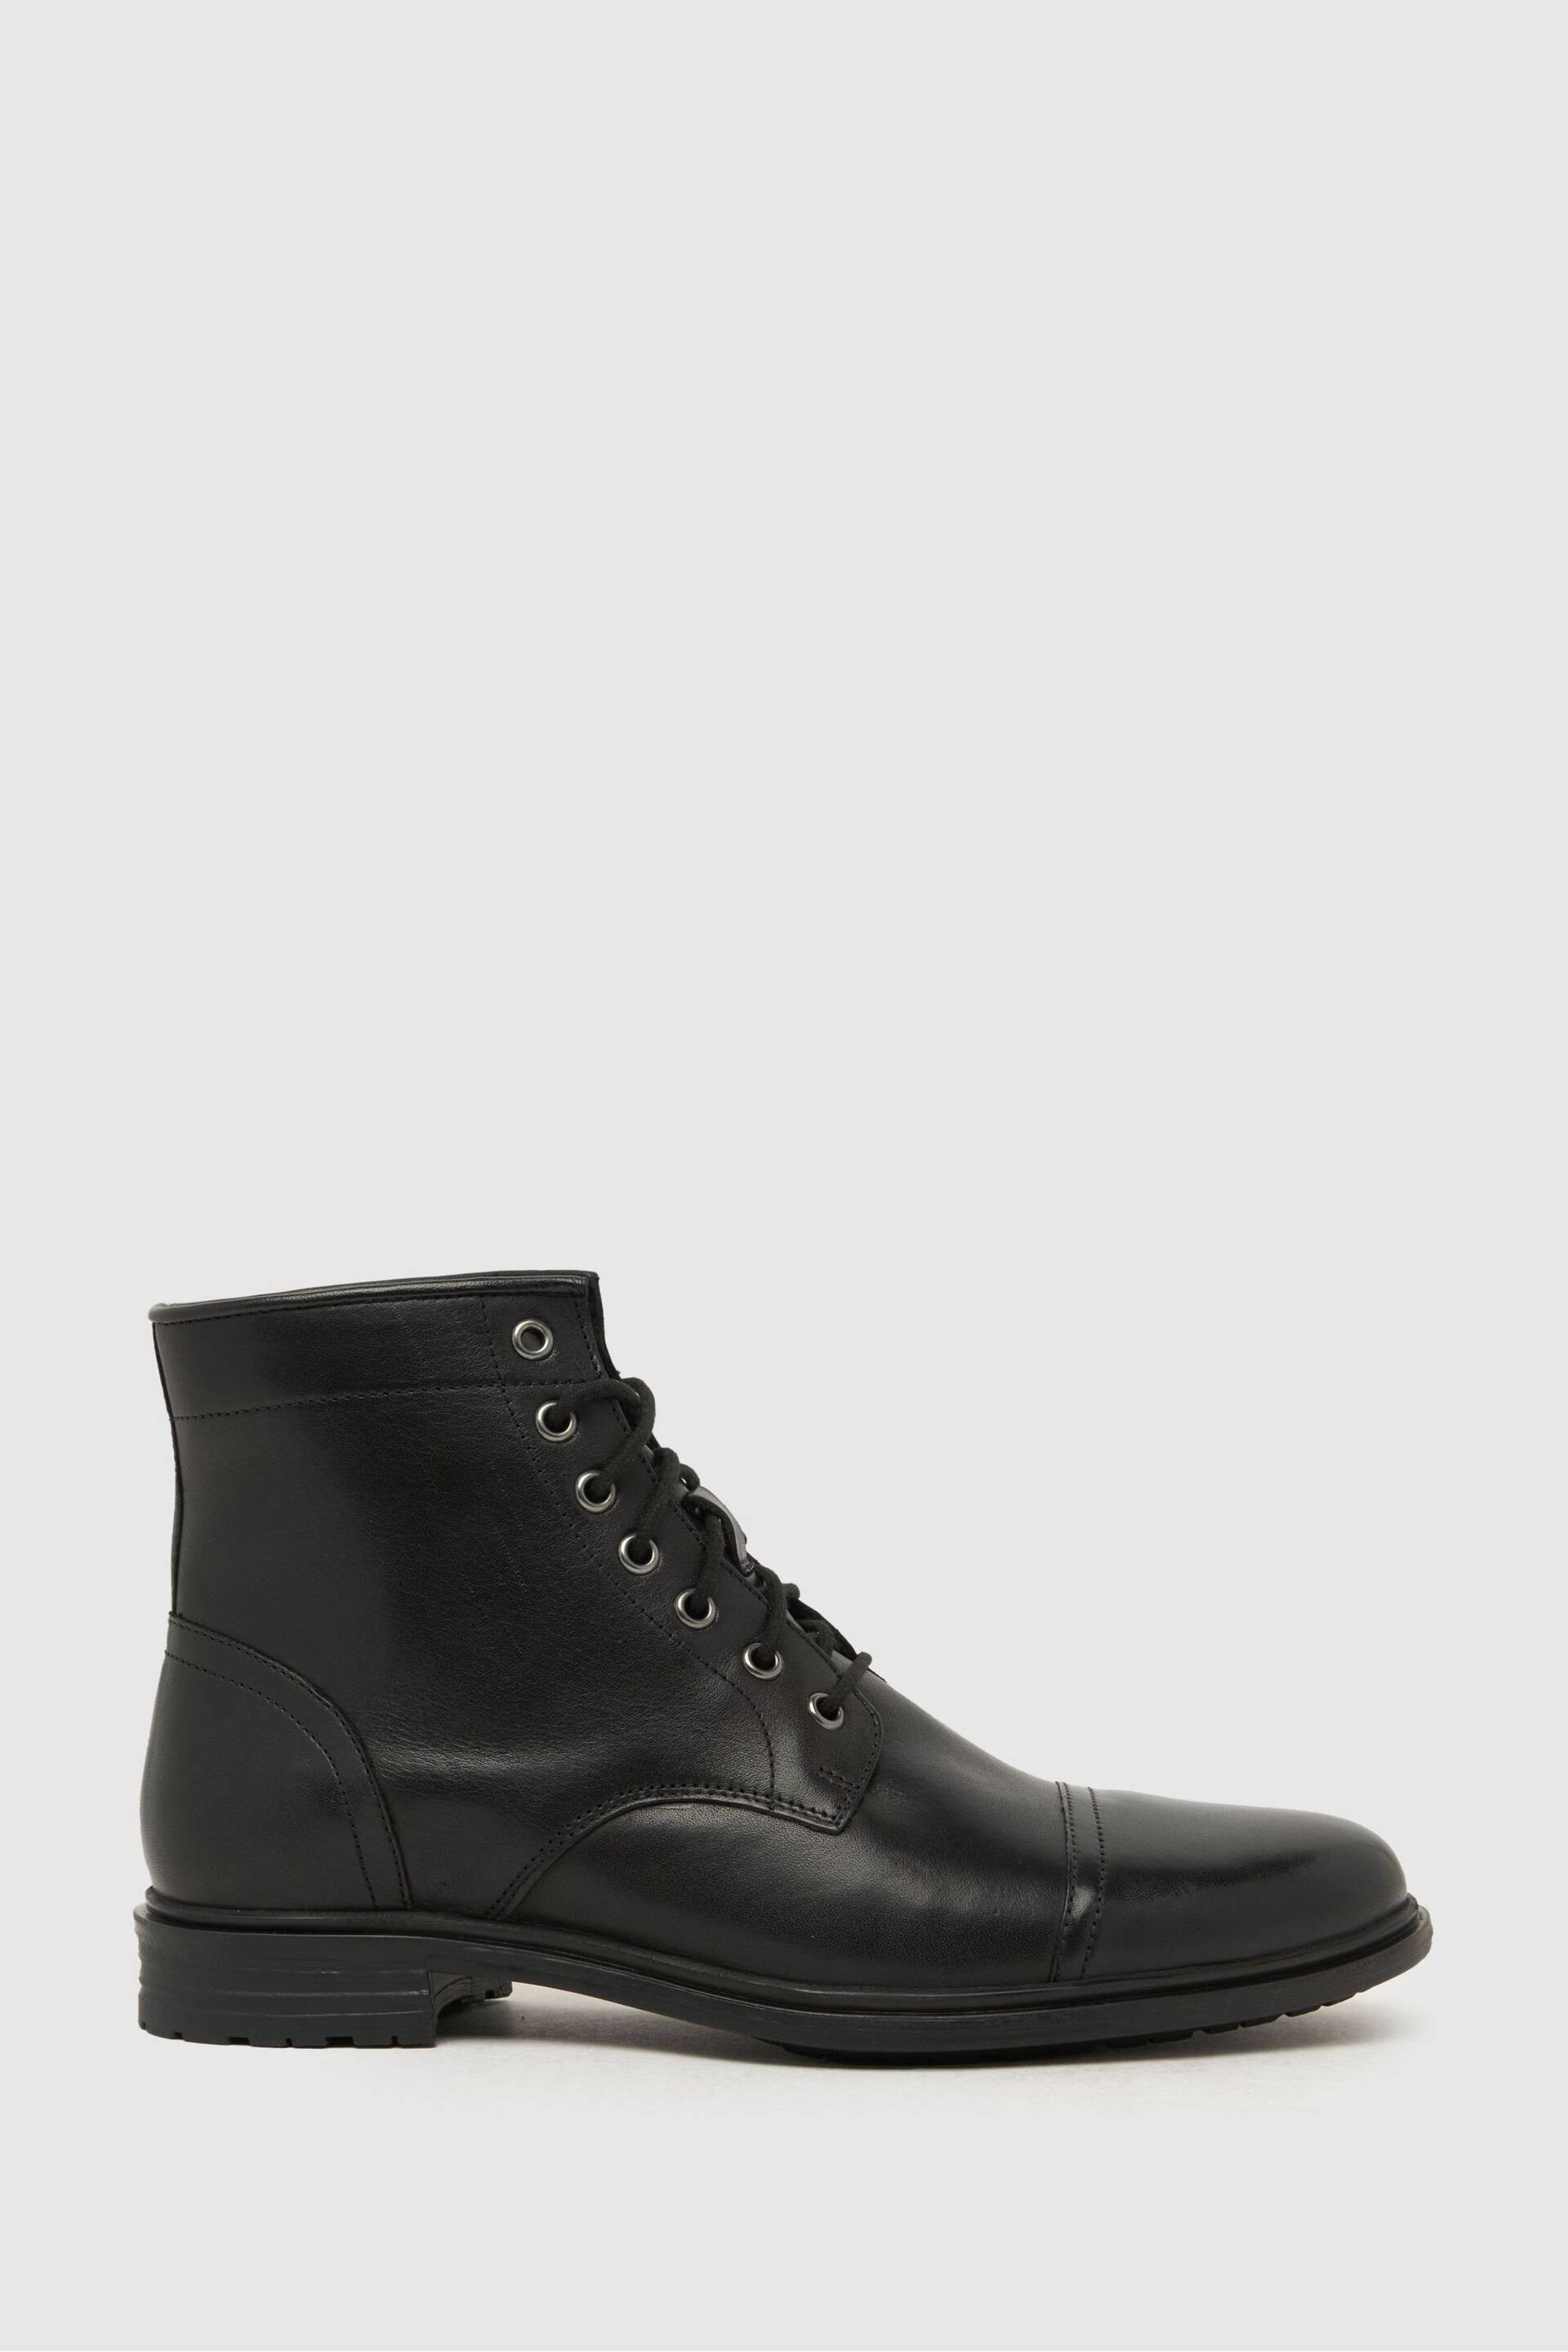 Schuh Deacon Leather Lace Boots - Image 1 of 4